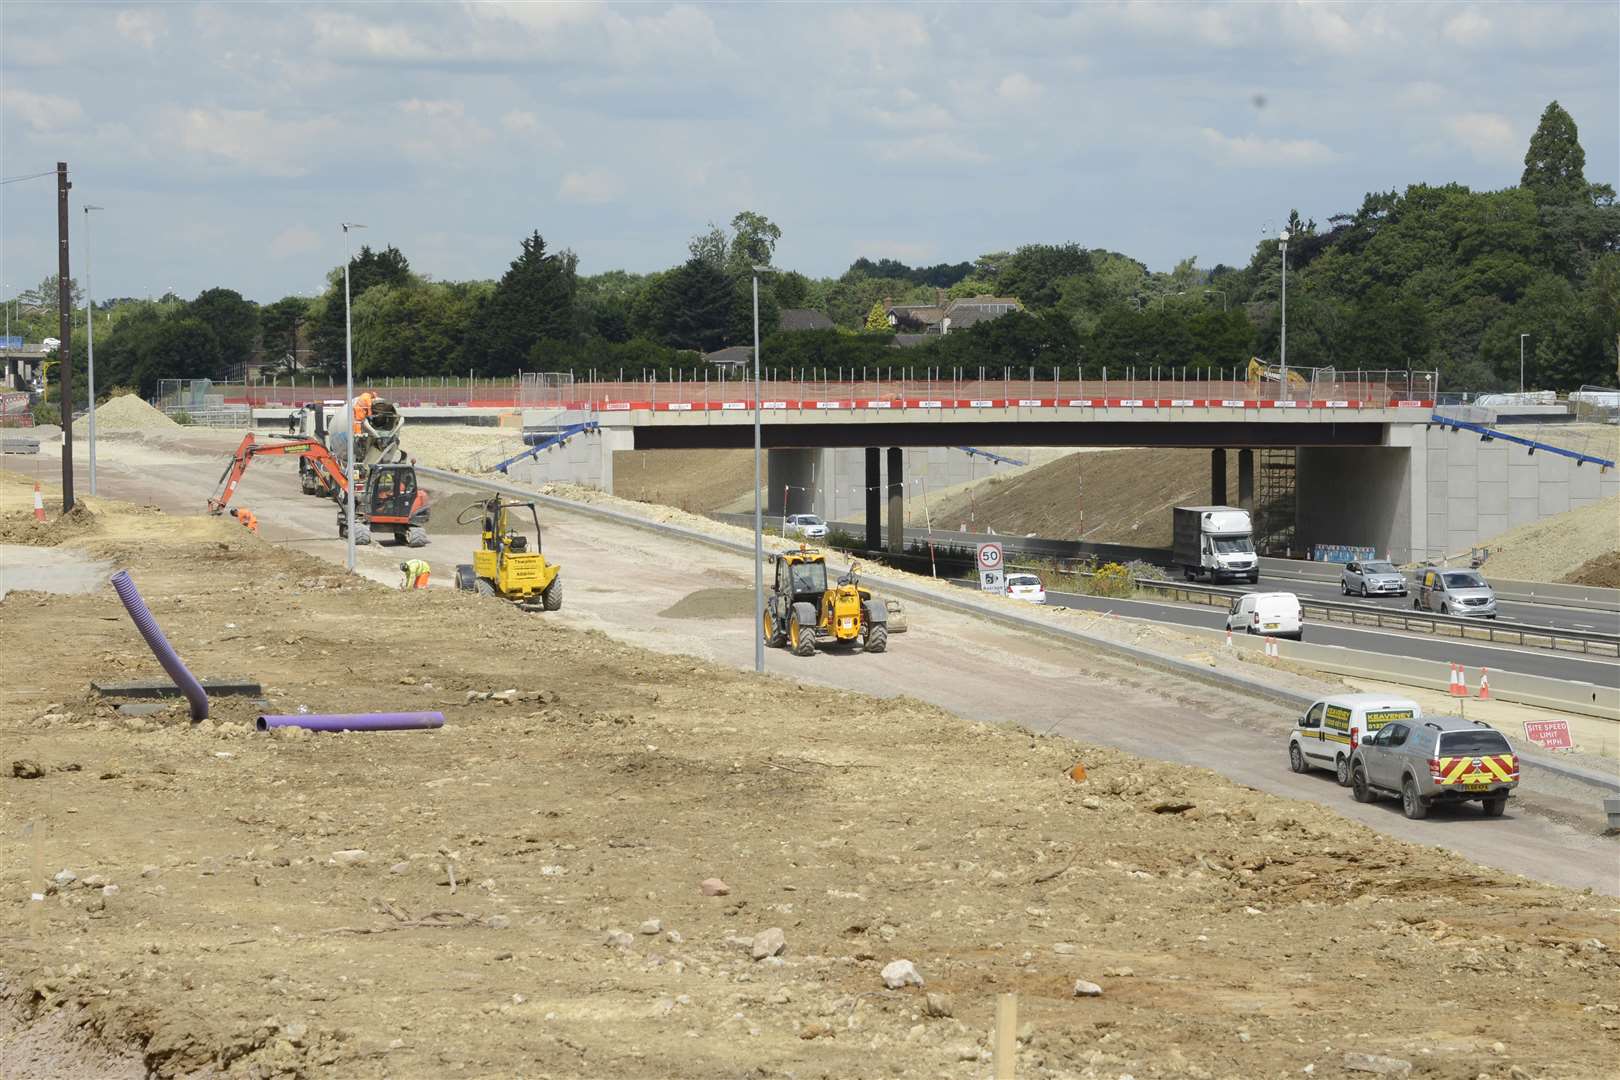 The motorway will close to allow contractors to continue work on Junction 10a